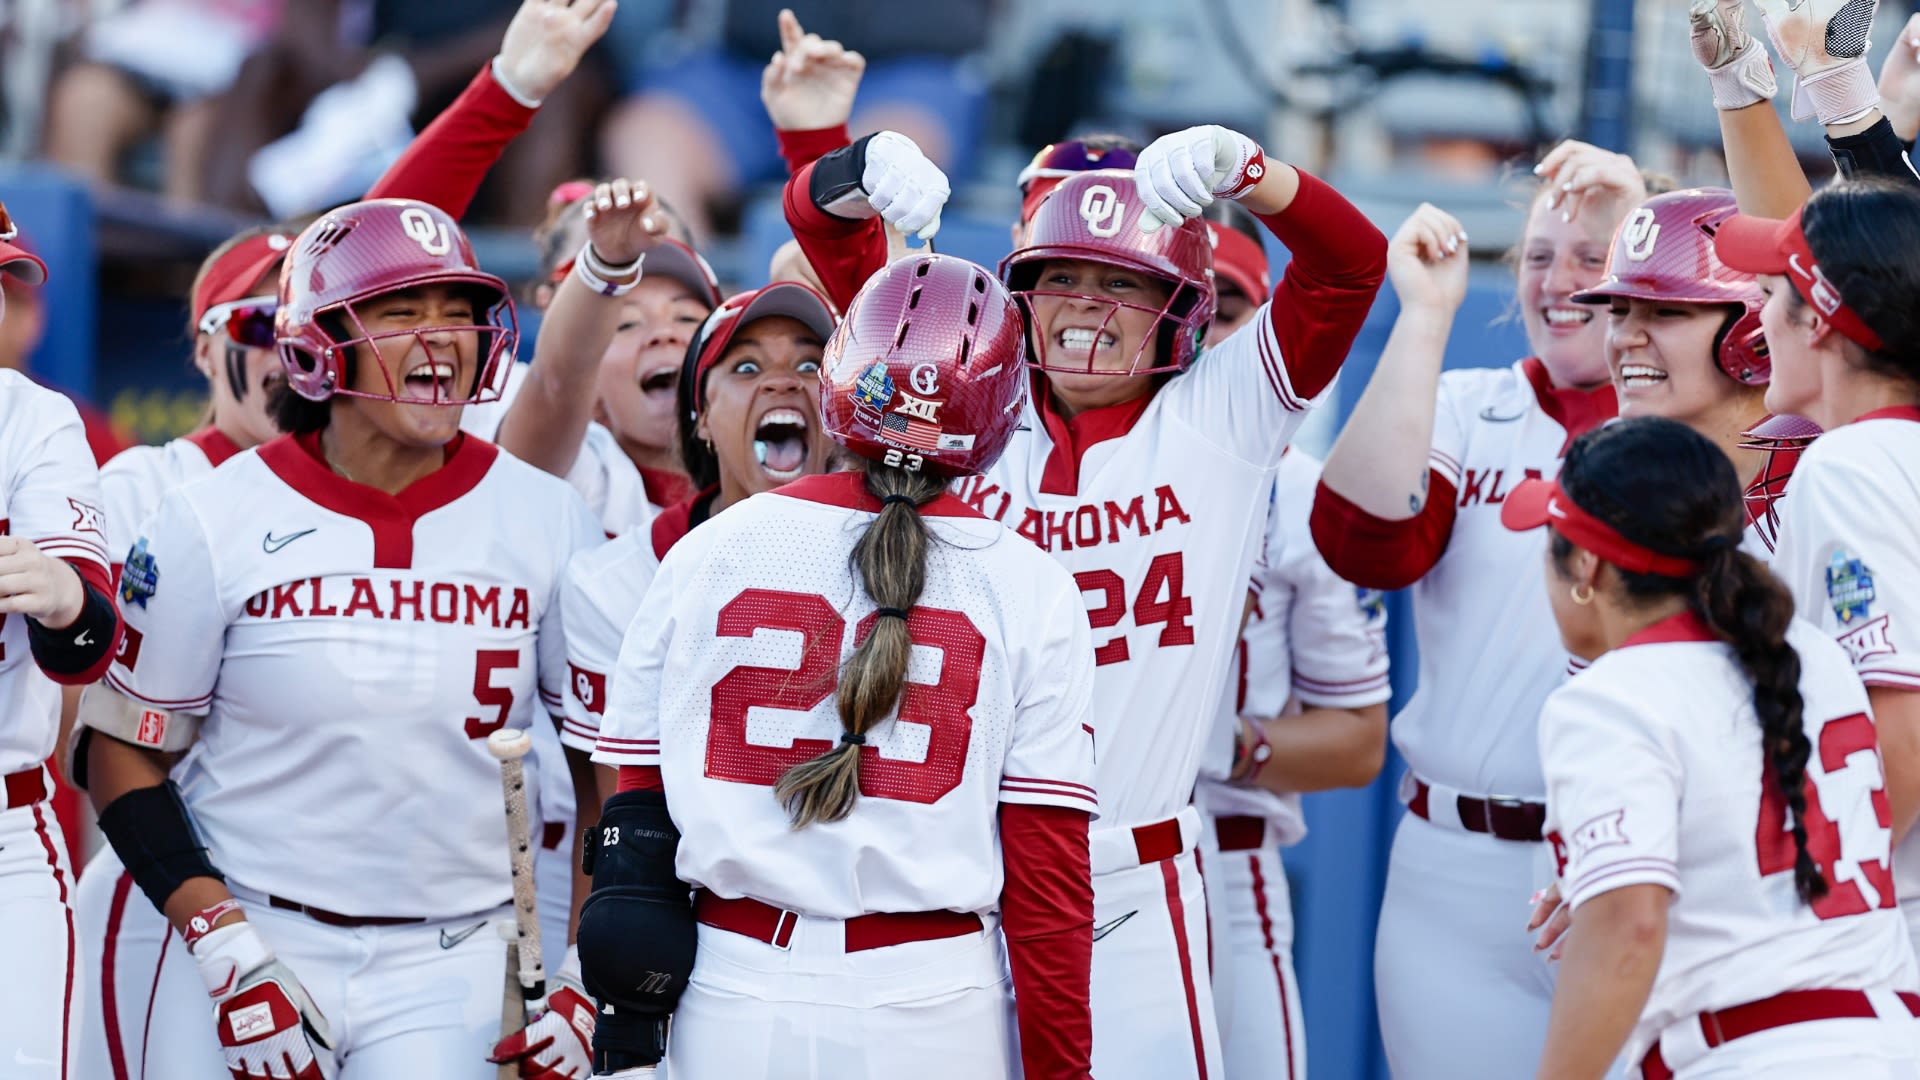 Oklahoma on the cusp of 4th straight title after Game 1 win over Texas - Stream the Video - Watch ESPN